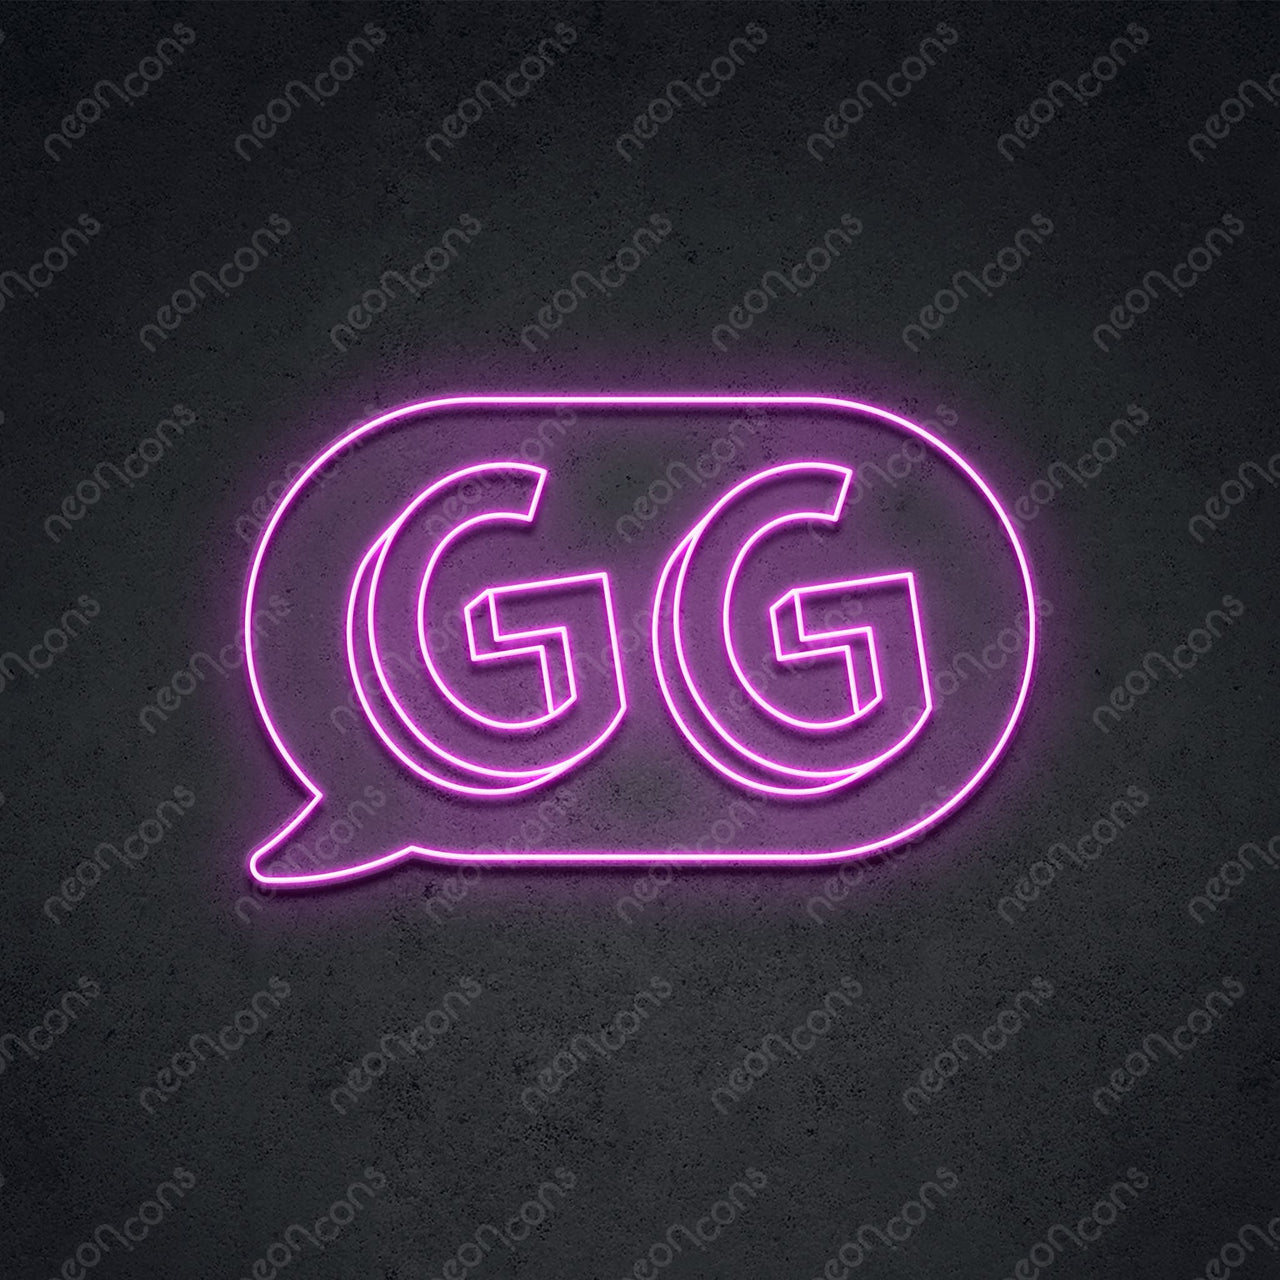 'GG In The Chat' Neon Sign 45cm (1.5ft) / Pink / LED by Neon Icons